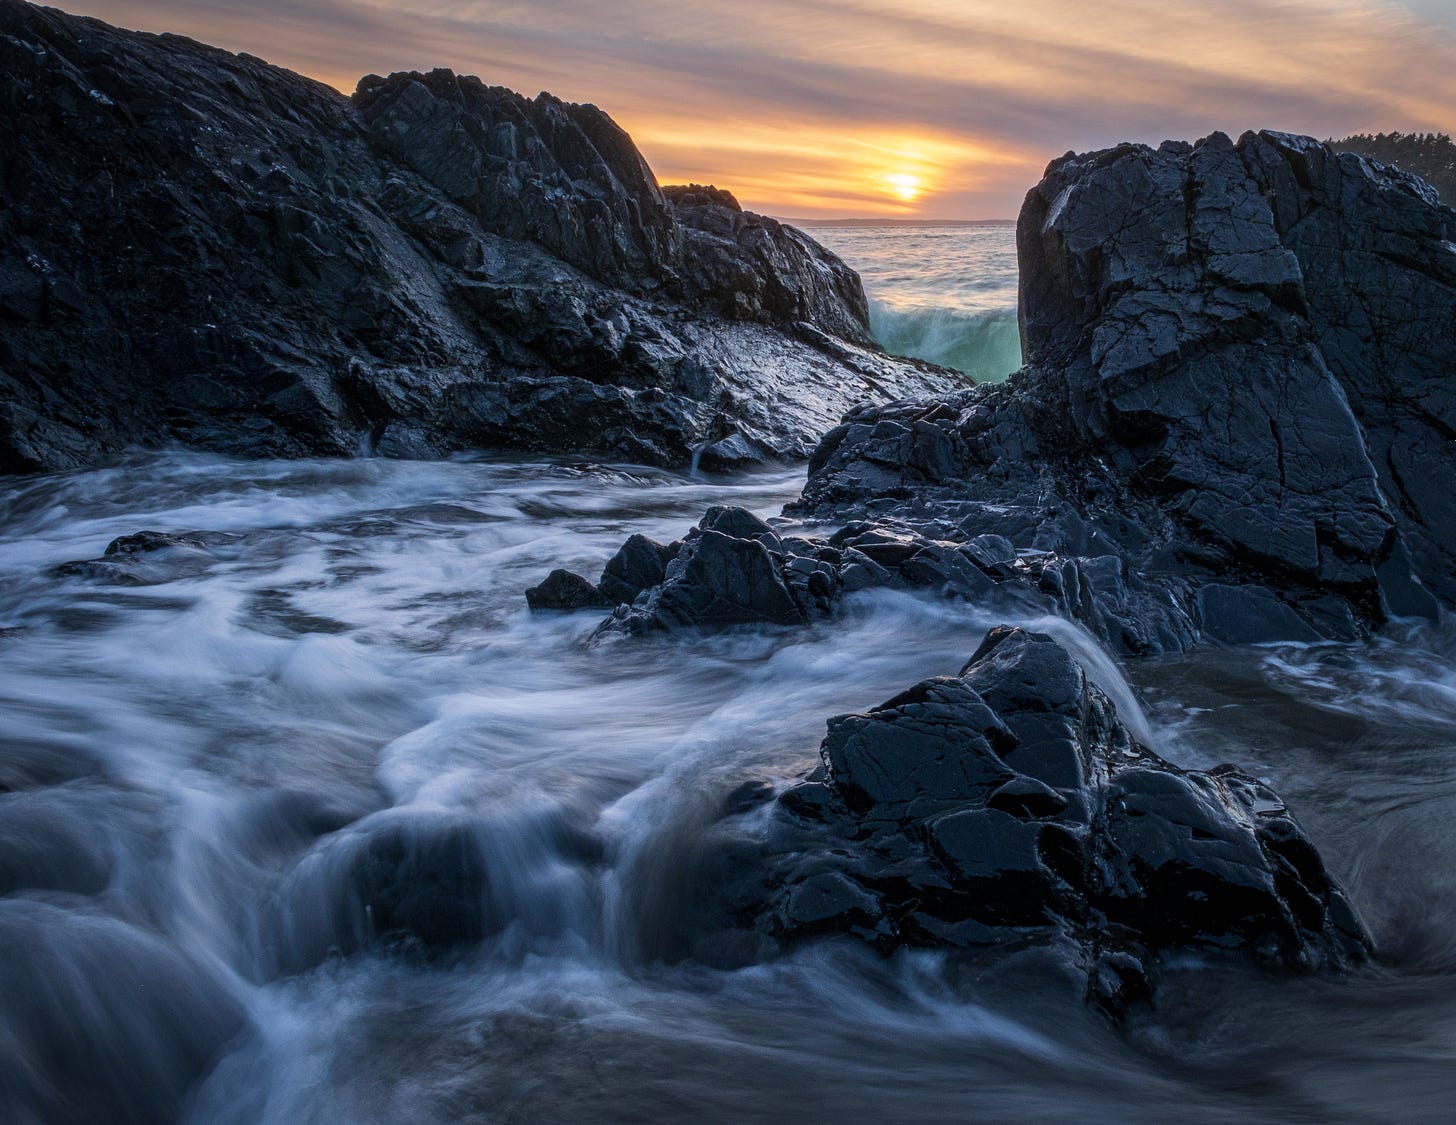 Rocks at sunset creating a small tide pool, photographed low to the ground and at a long exposure.